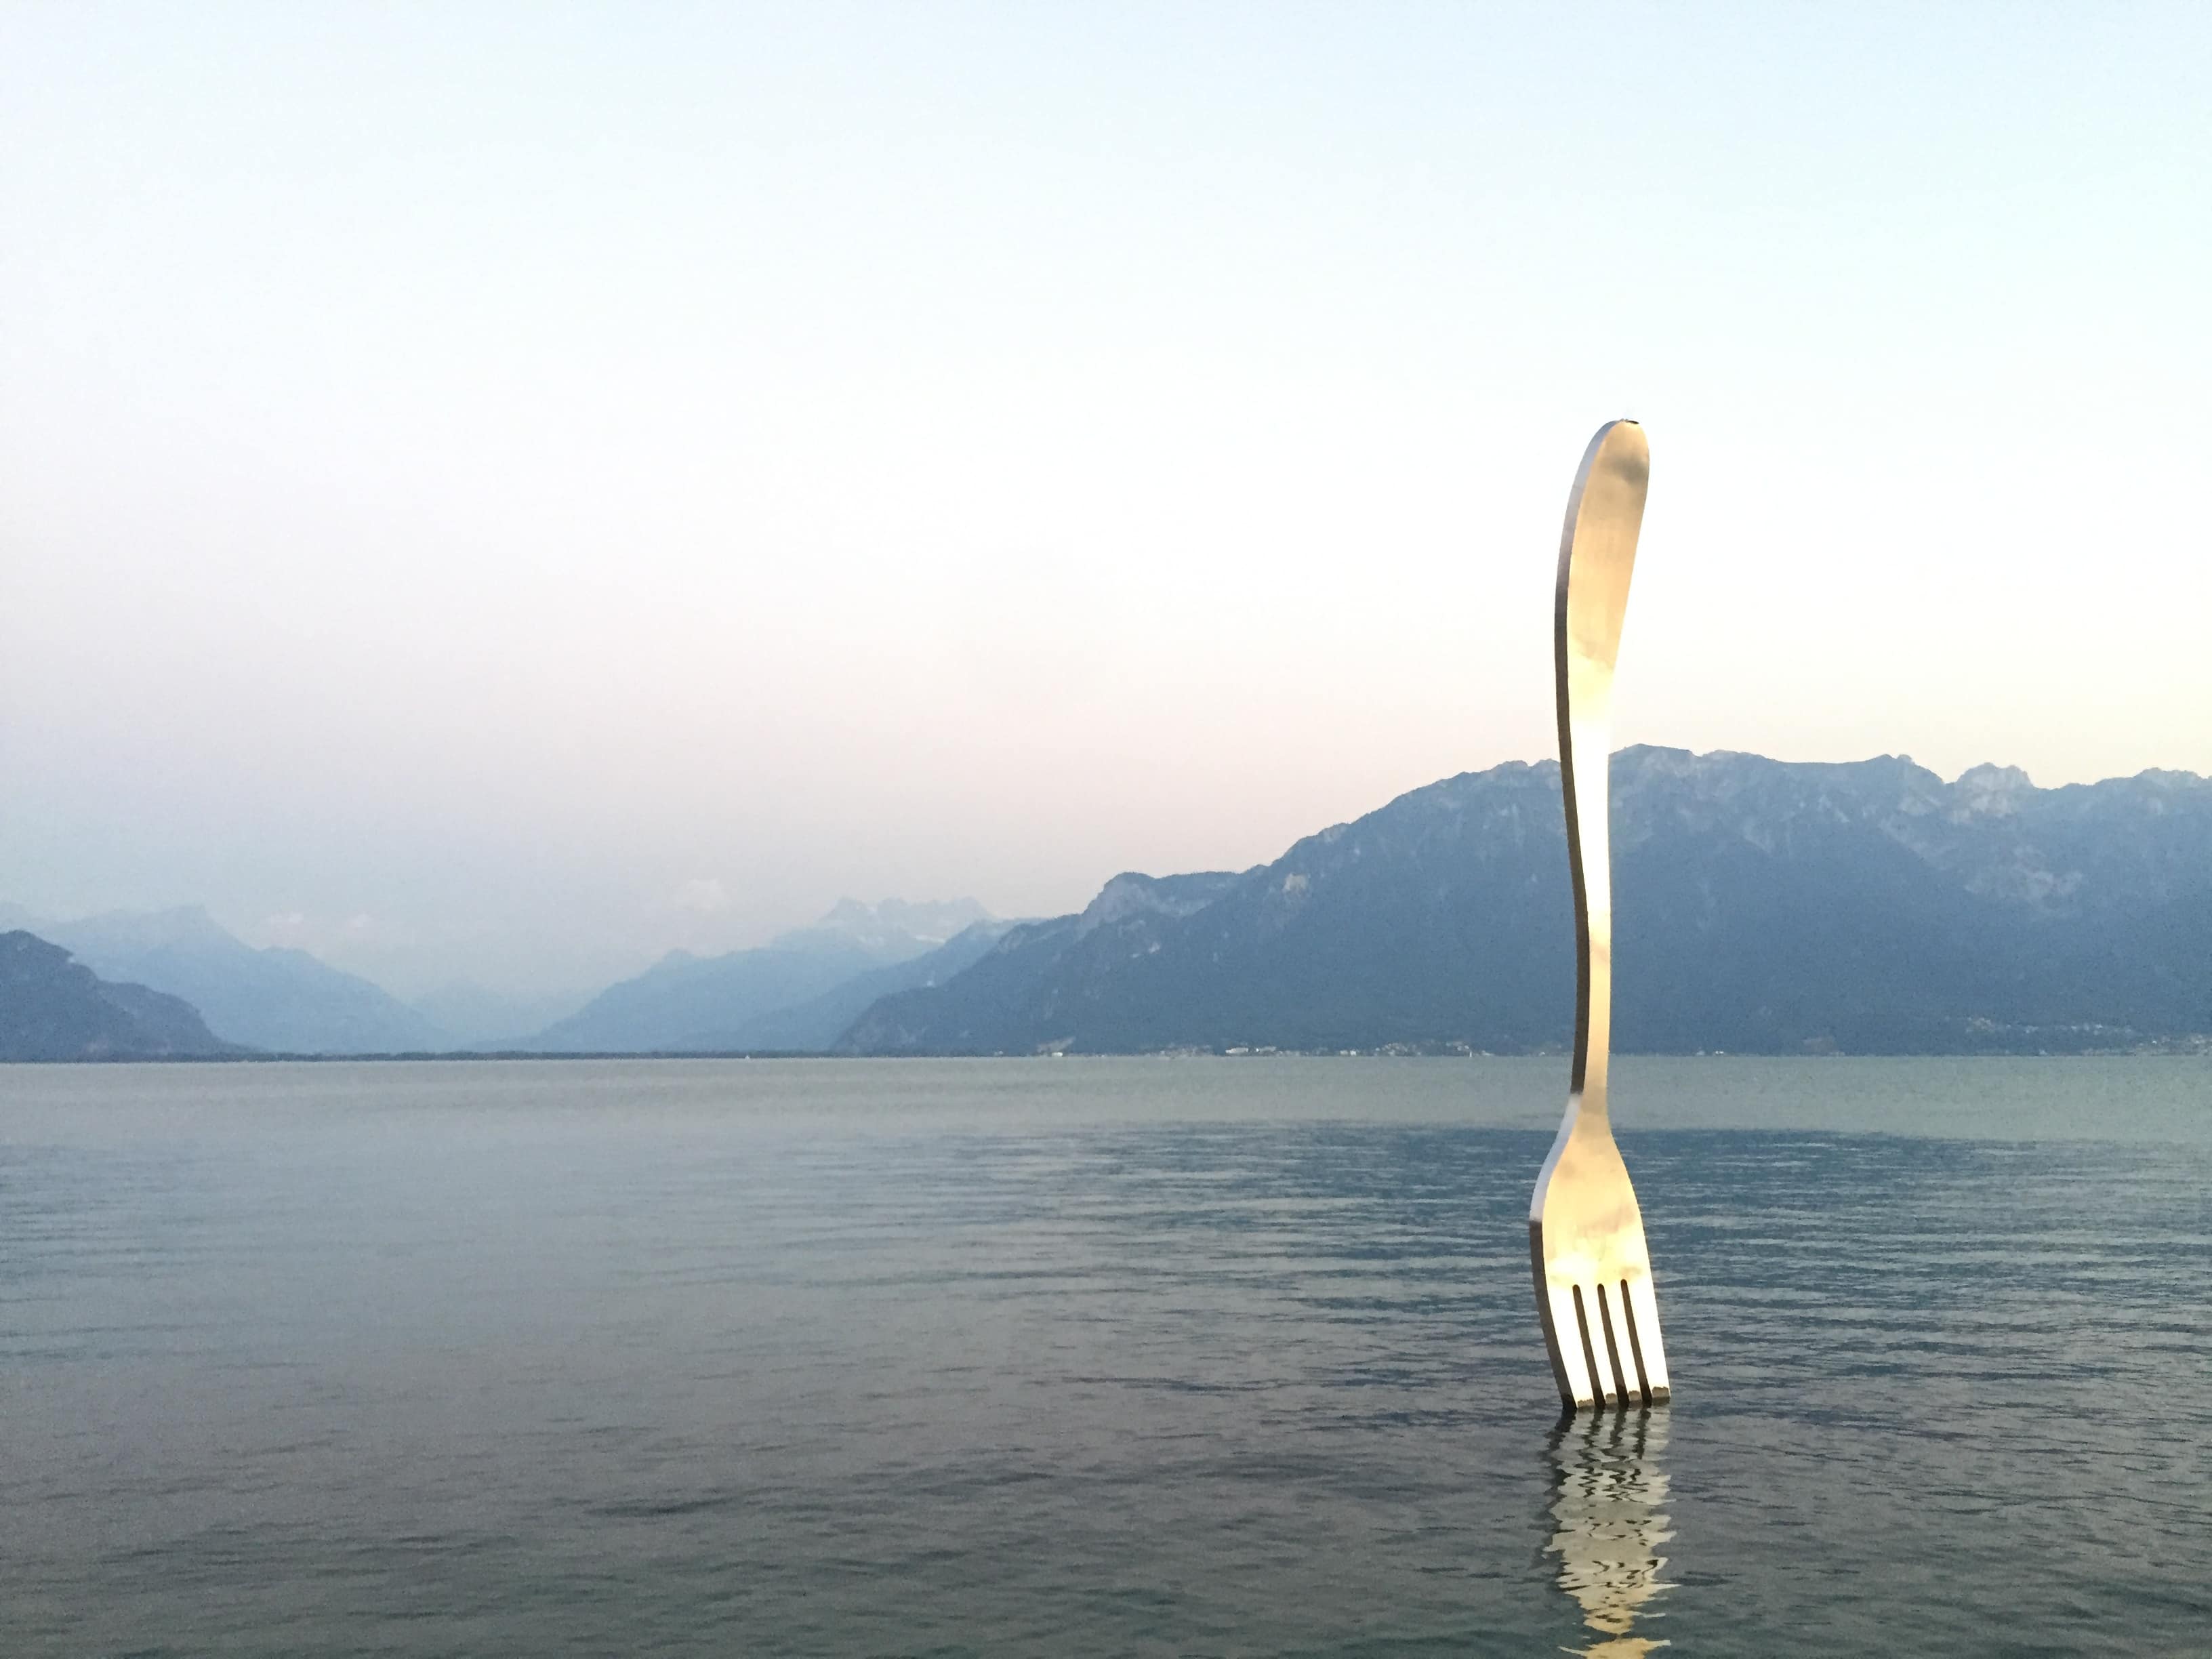 A massive fork in Vevey/Lac Leman